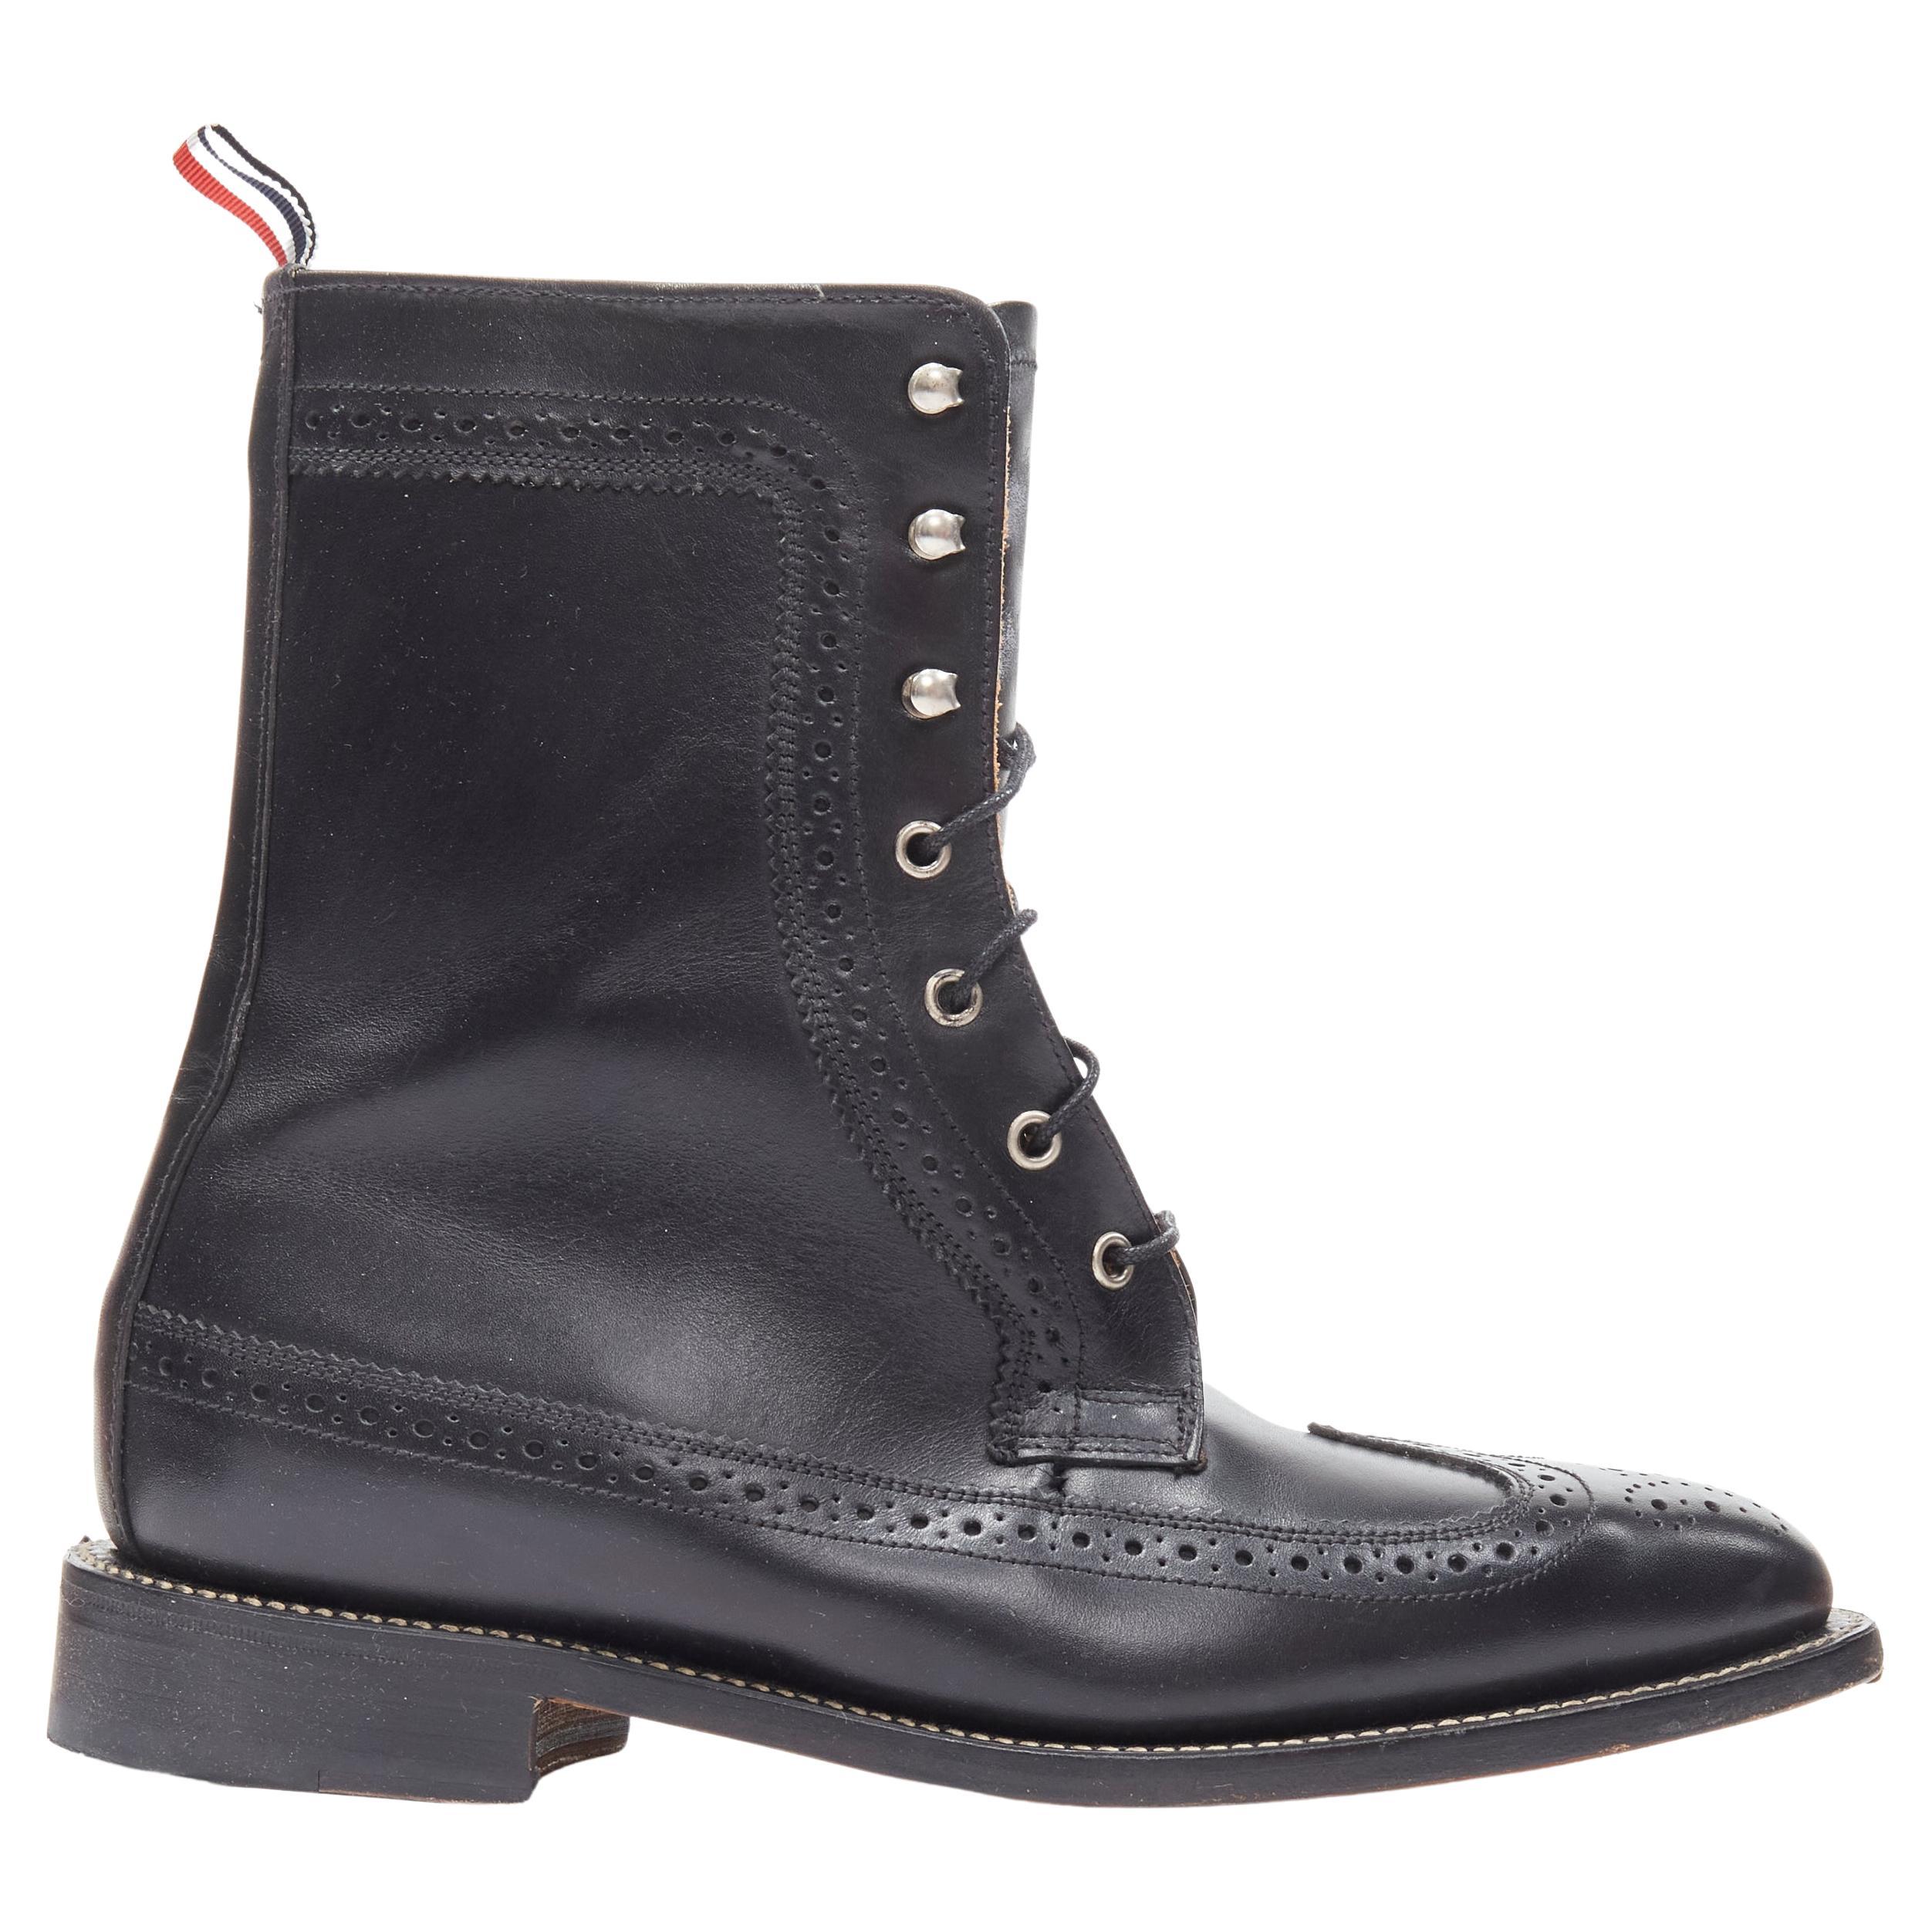 THOM BROWNE black perforated brogue lace up Classic Longwing boot EU39